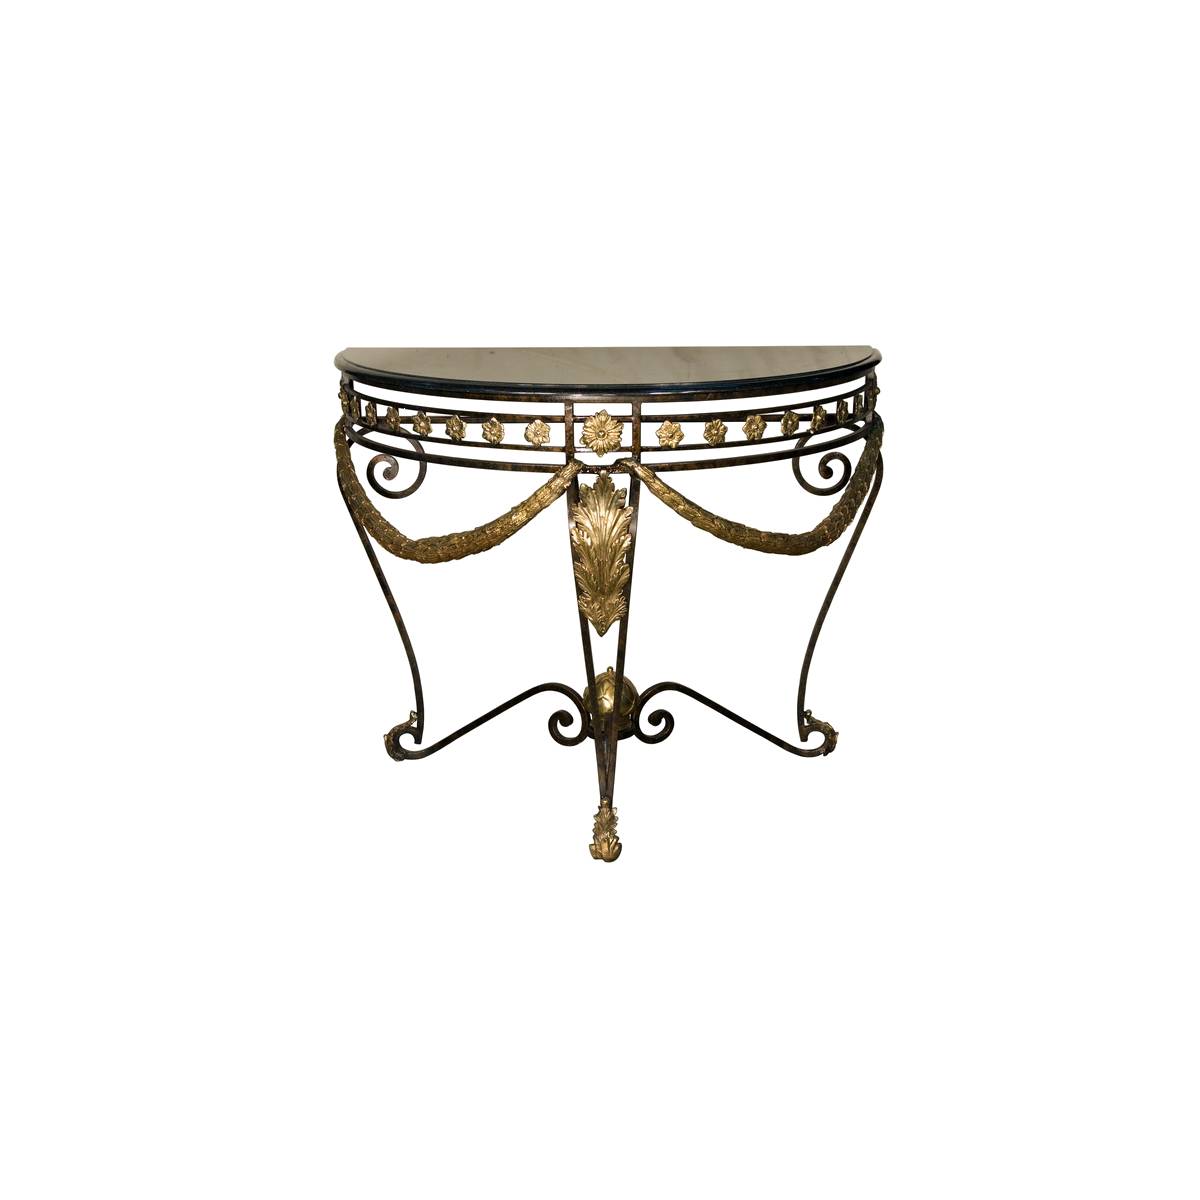 Bronze Ornate Half Moon Table with Marble Top Sculpture